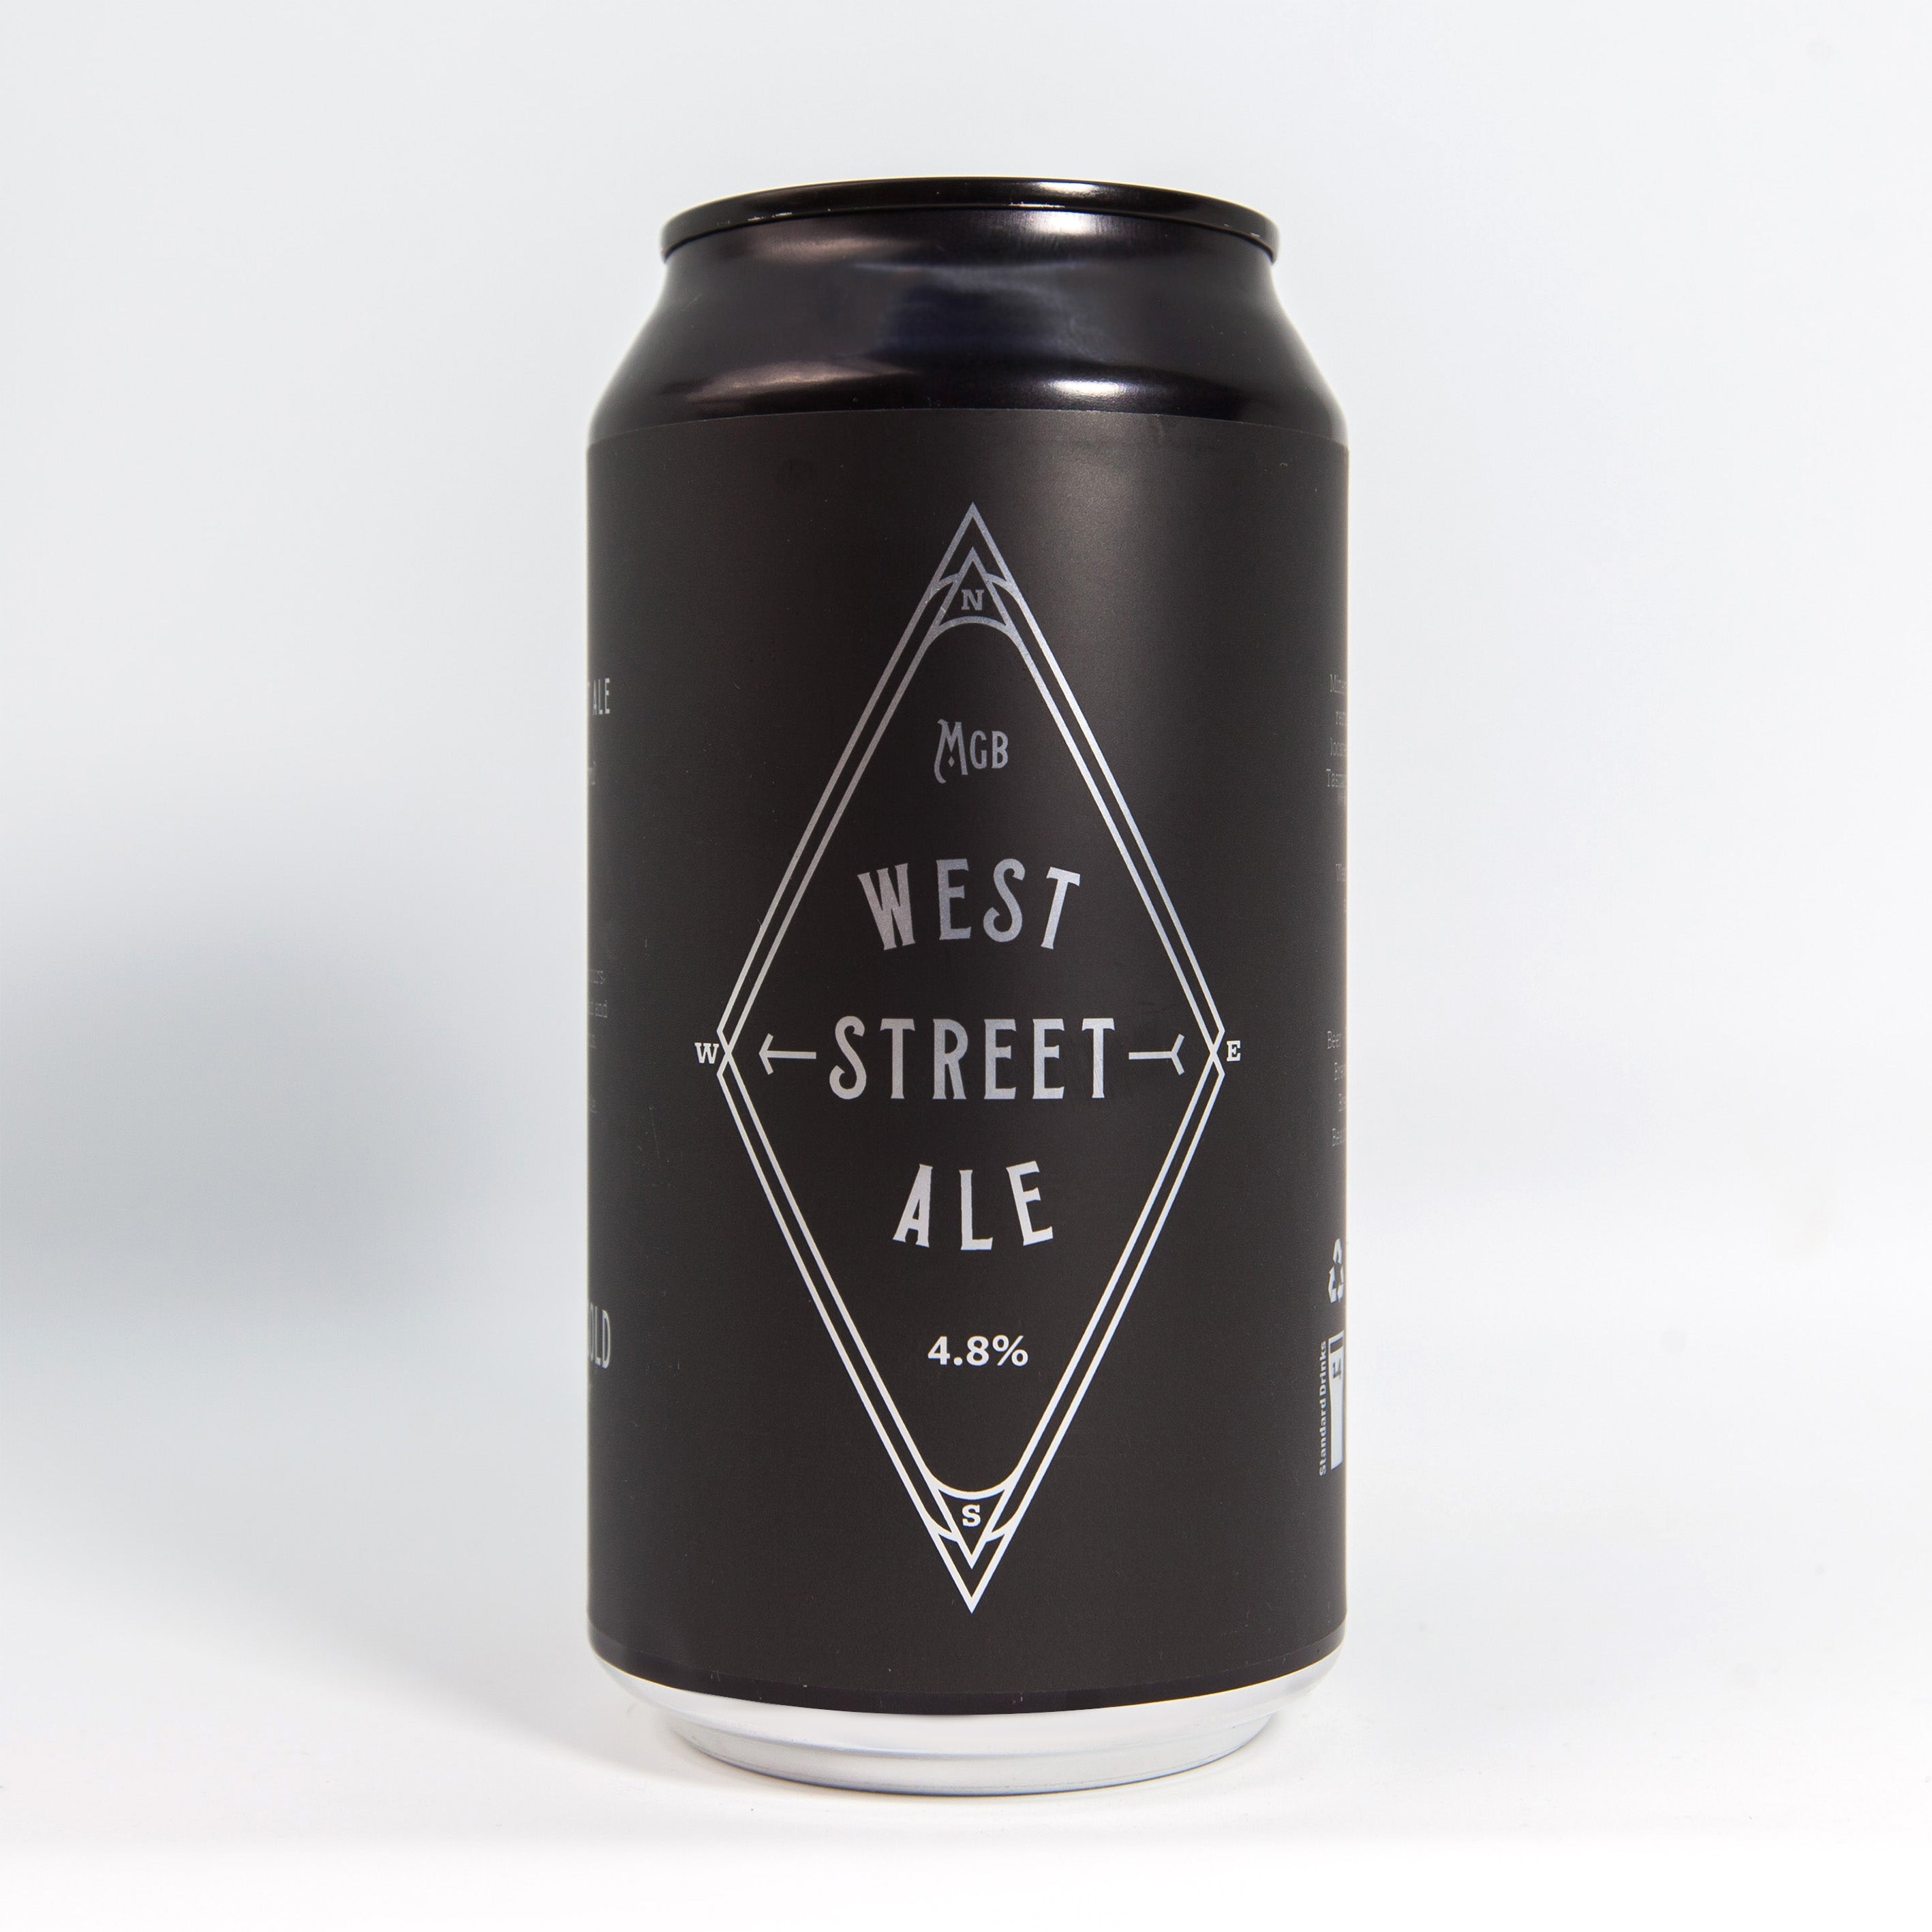 This is a photo of a black can of beer that has been made by Miners Gold Brewery and it is called West Street Ale. The beer is an Ale and is 4.8% ABV